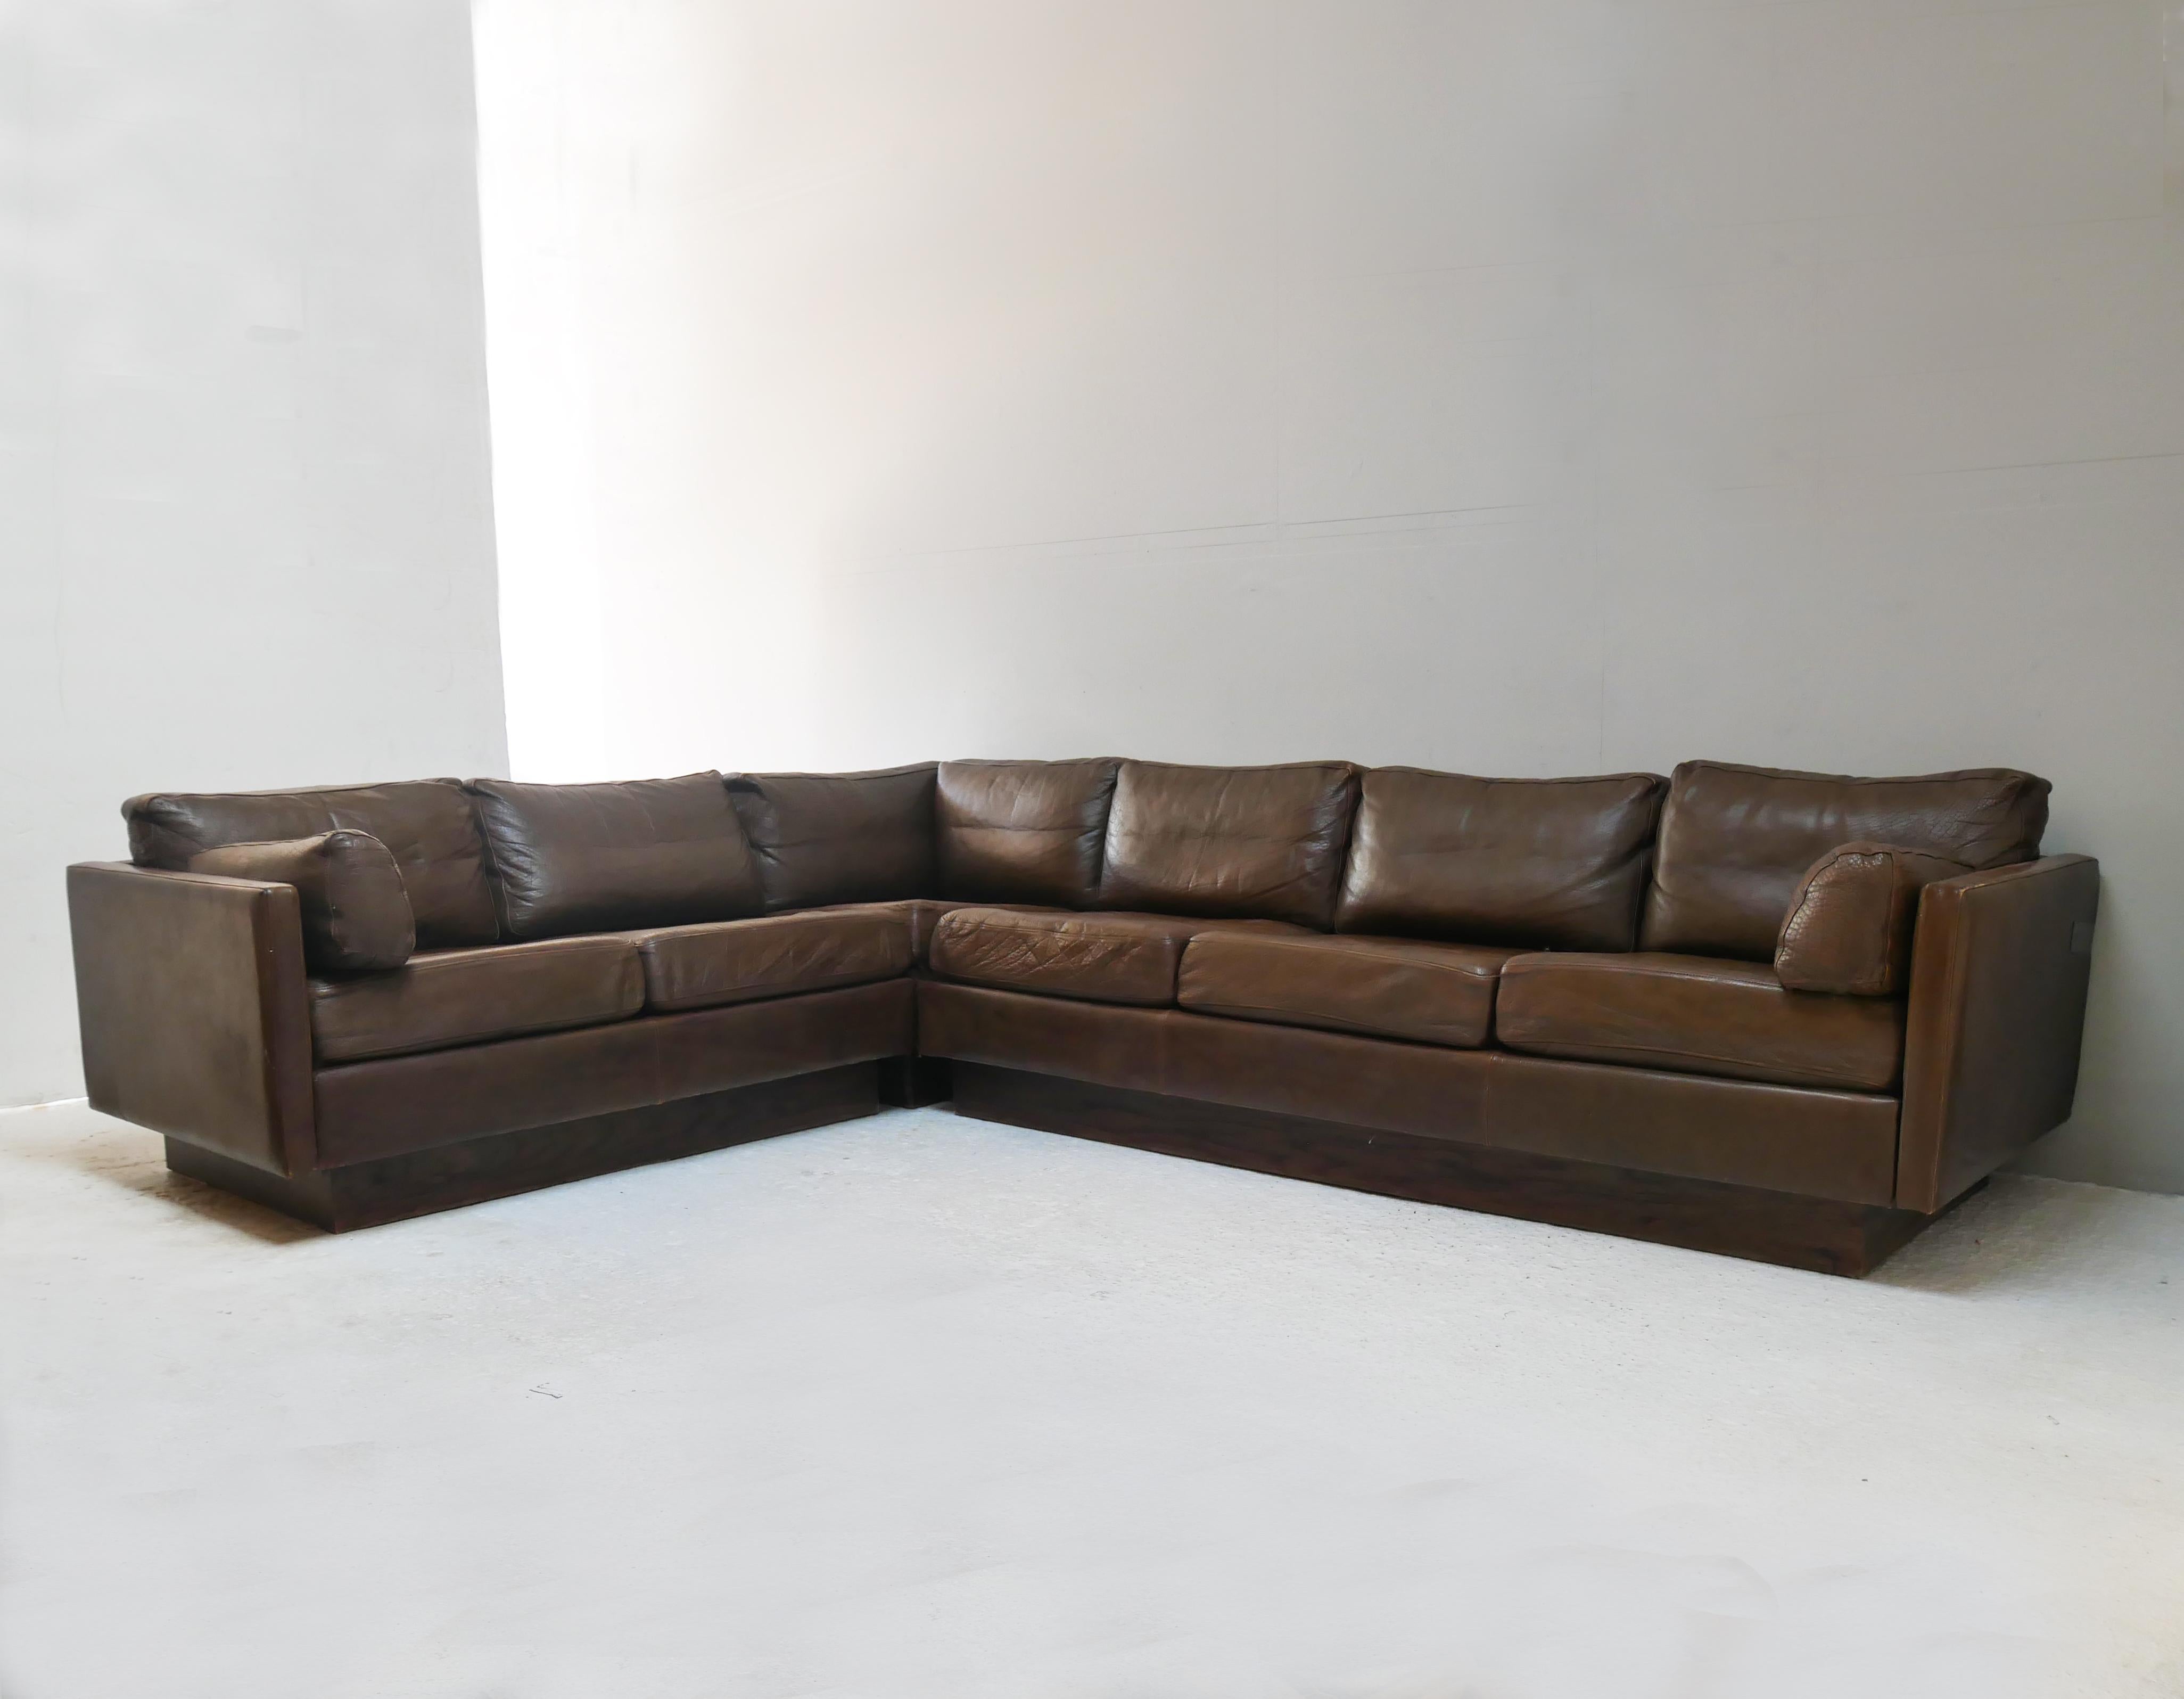 A Mid-Century Modern sectional sofa made in the early 1970’s in Denmark.
Upholstered in the original thick brown leather which is in great condition. Sits on wooden plinth base. All cushioning in great condition. Extremely comfortable.

Overall